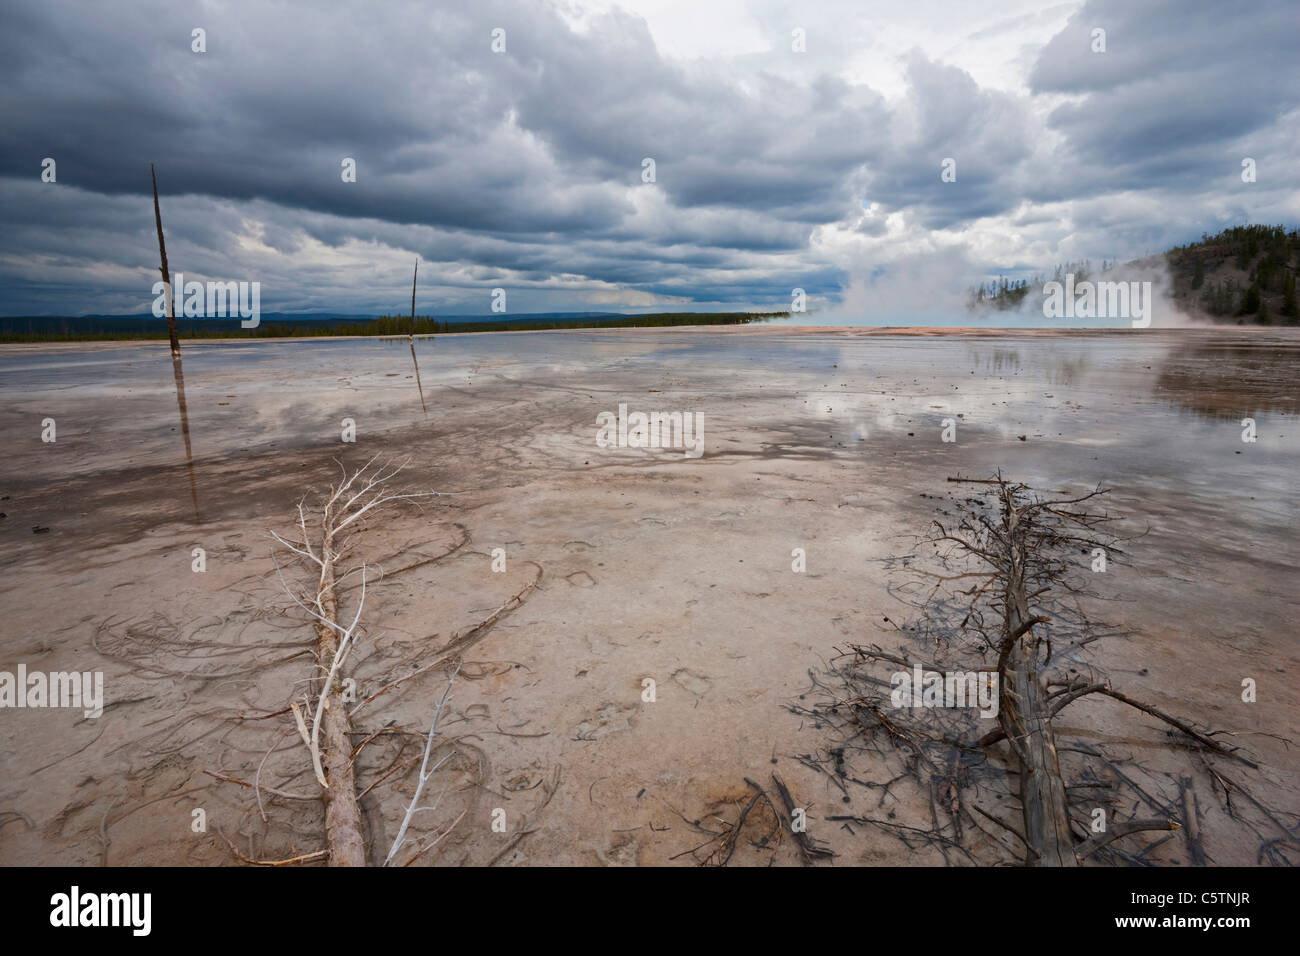 USA, Wyoming, Yellowstone National Park, Grand Prismatic Spring avec arbres morts Banque D'Images